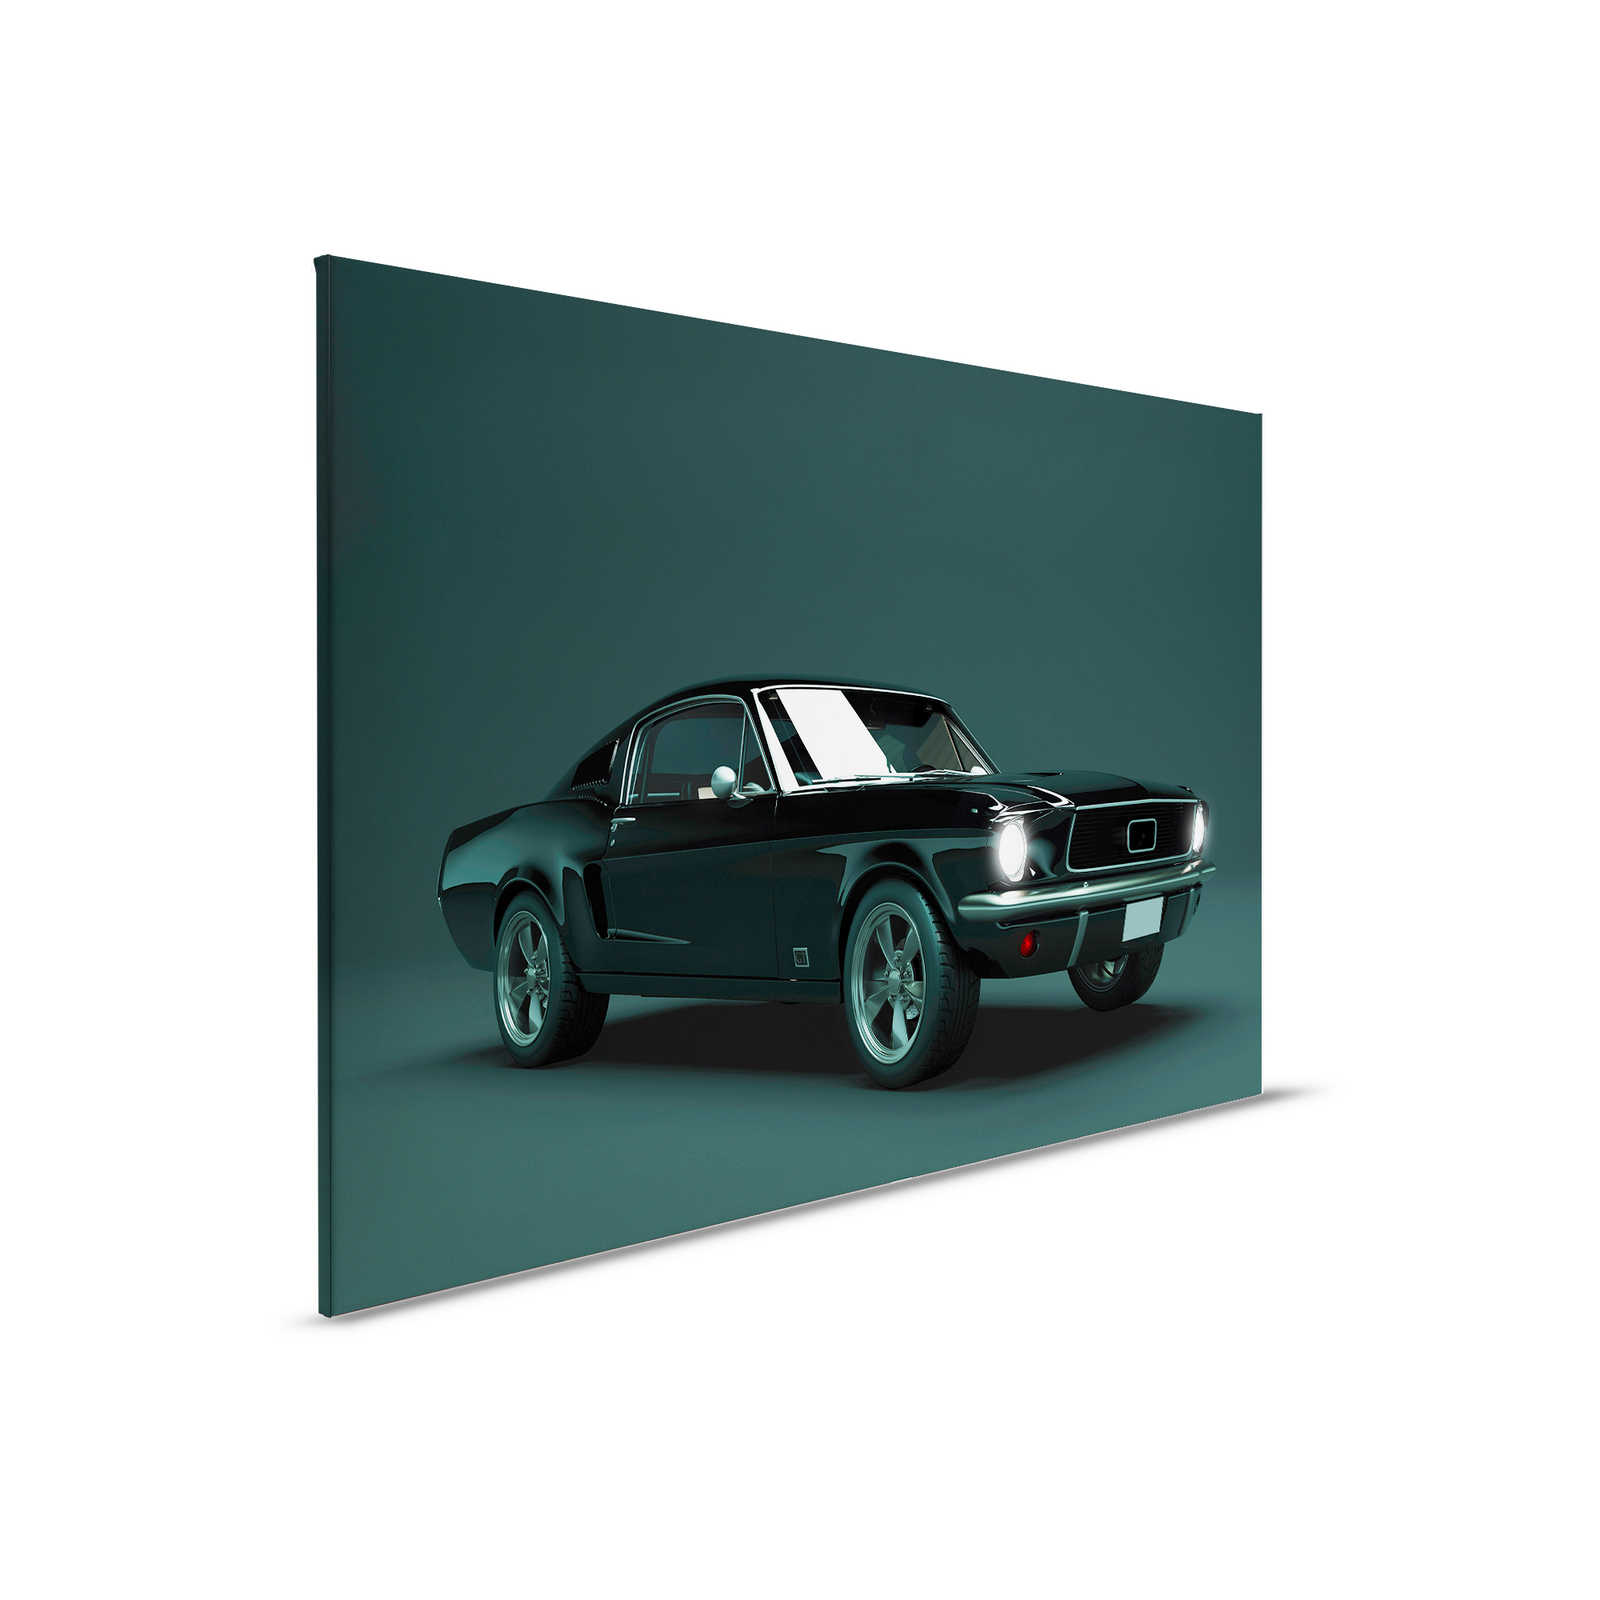         Mustang 2 - Canvas painting, Mustang 1968 Vintage Car - 0.90 m x 0.60 m
    